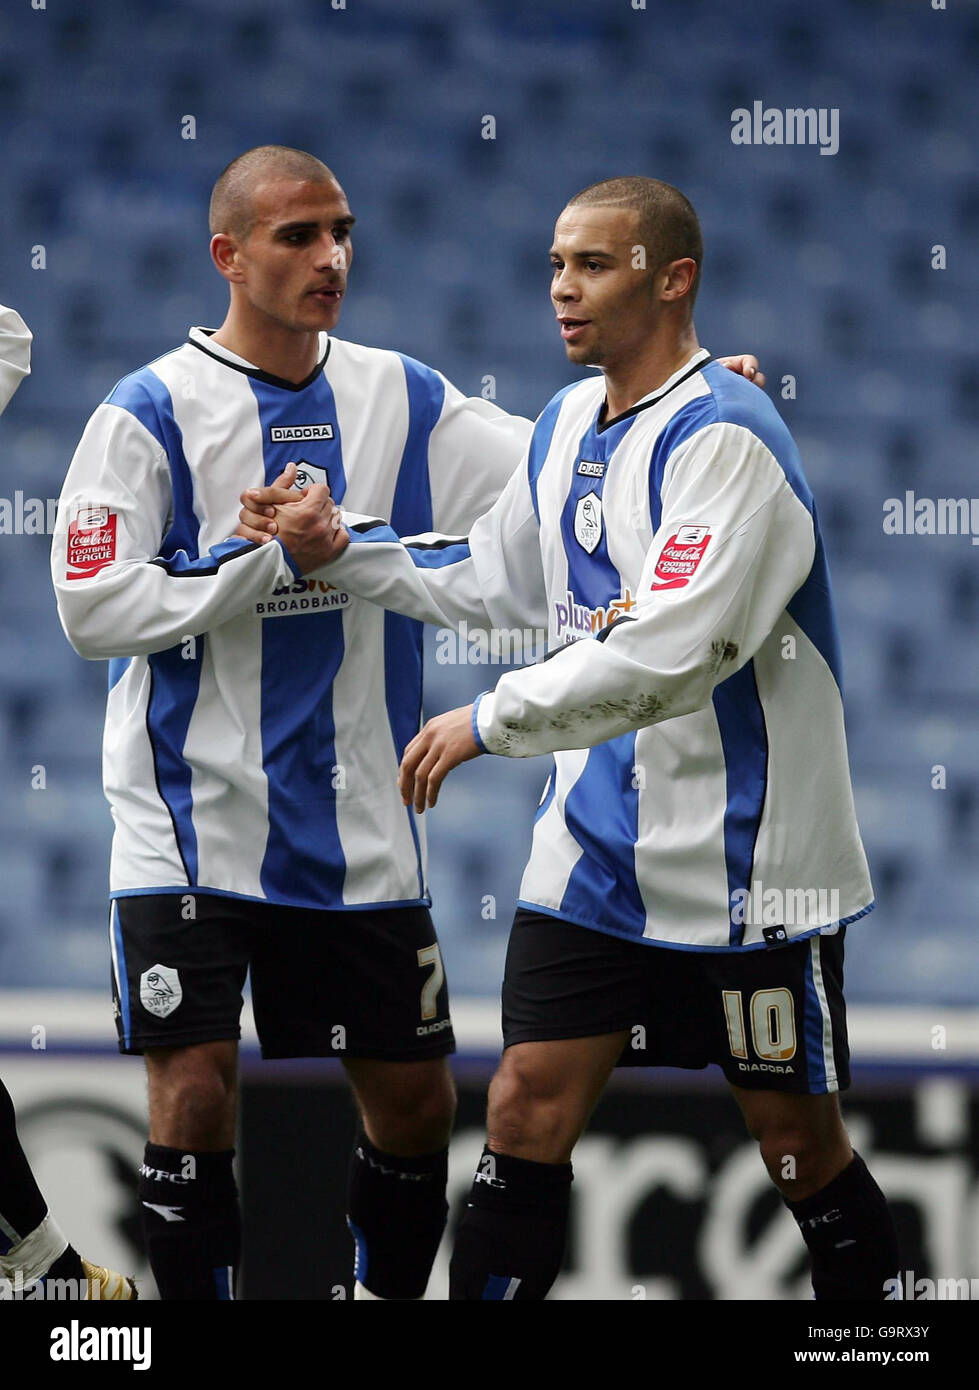 Sheffield Wednesday's Deon Burton celebrates with Marcus Tudgay (left) after scoring during the Coca-Cola Football League Championship match at Hillsborough, Sheffield. Stock Photo